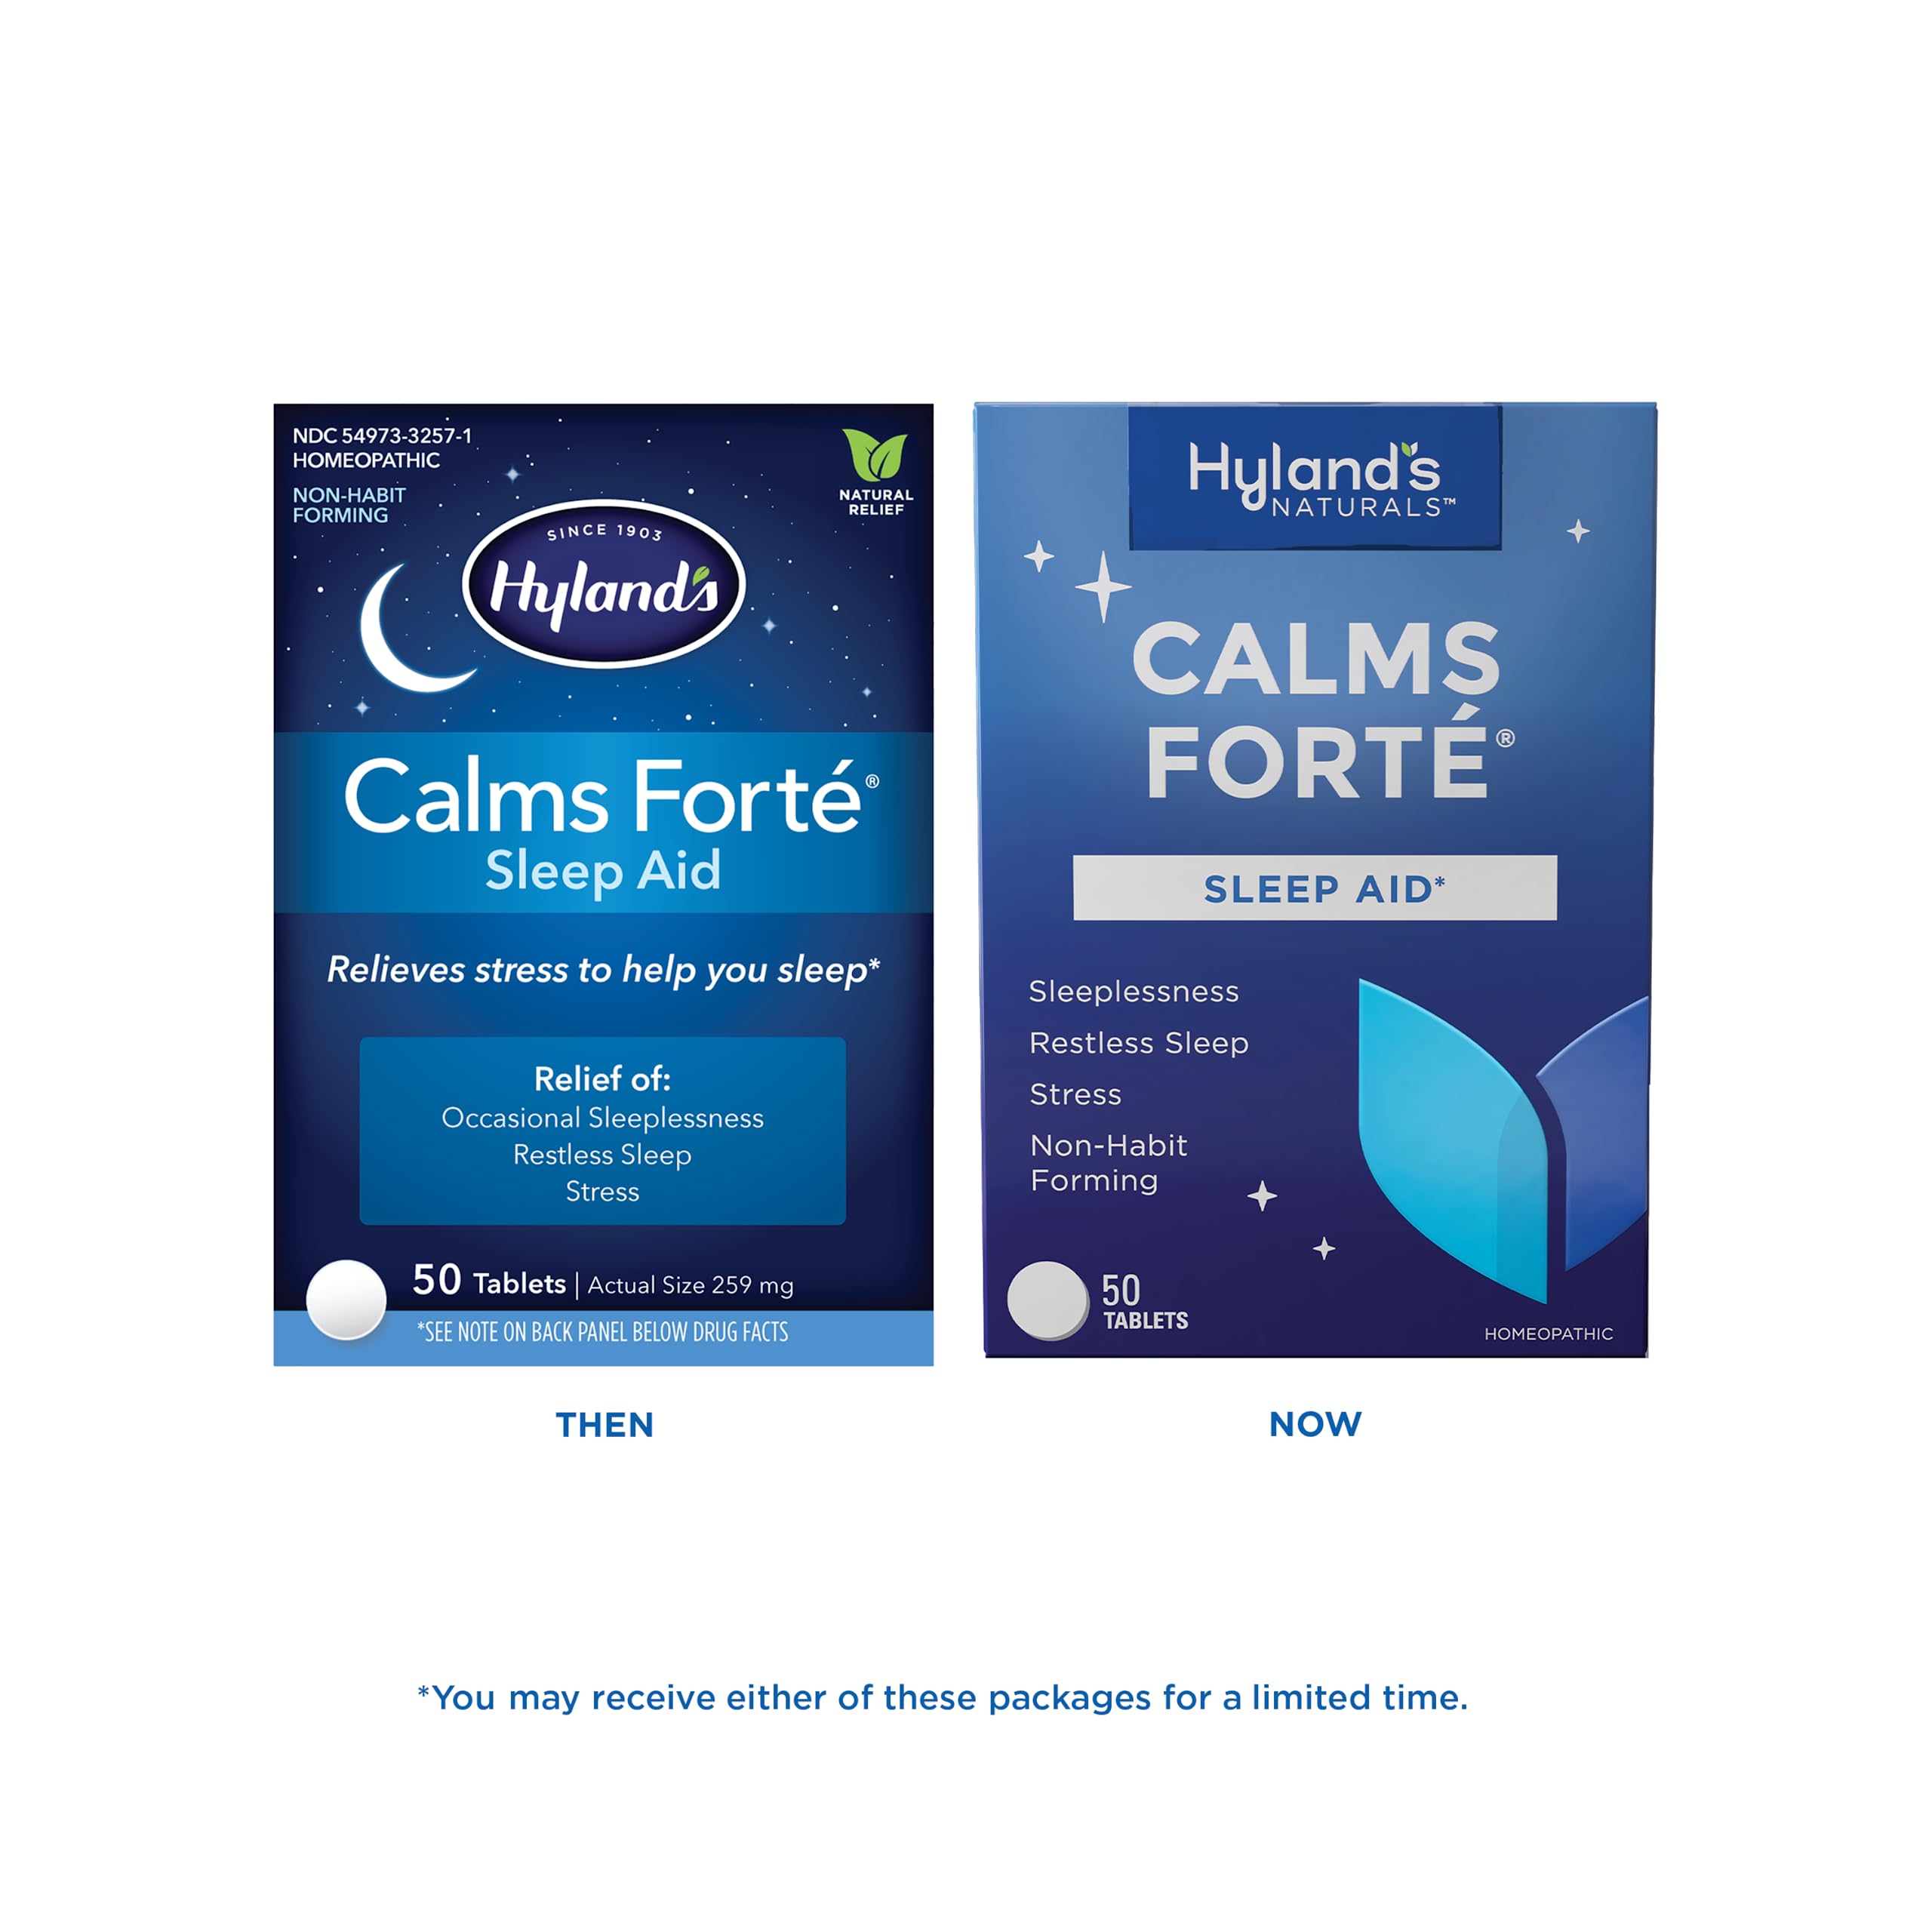 Hyland’s Calms Forte' Sleep Aid Tablets, Natural Relief of Nervous Tension and Occasional Sleeplessness, 50 Count